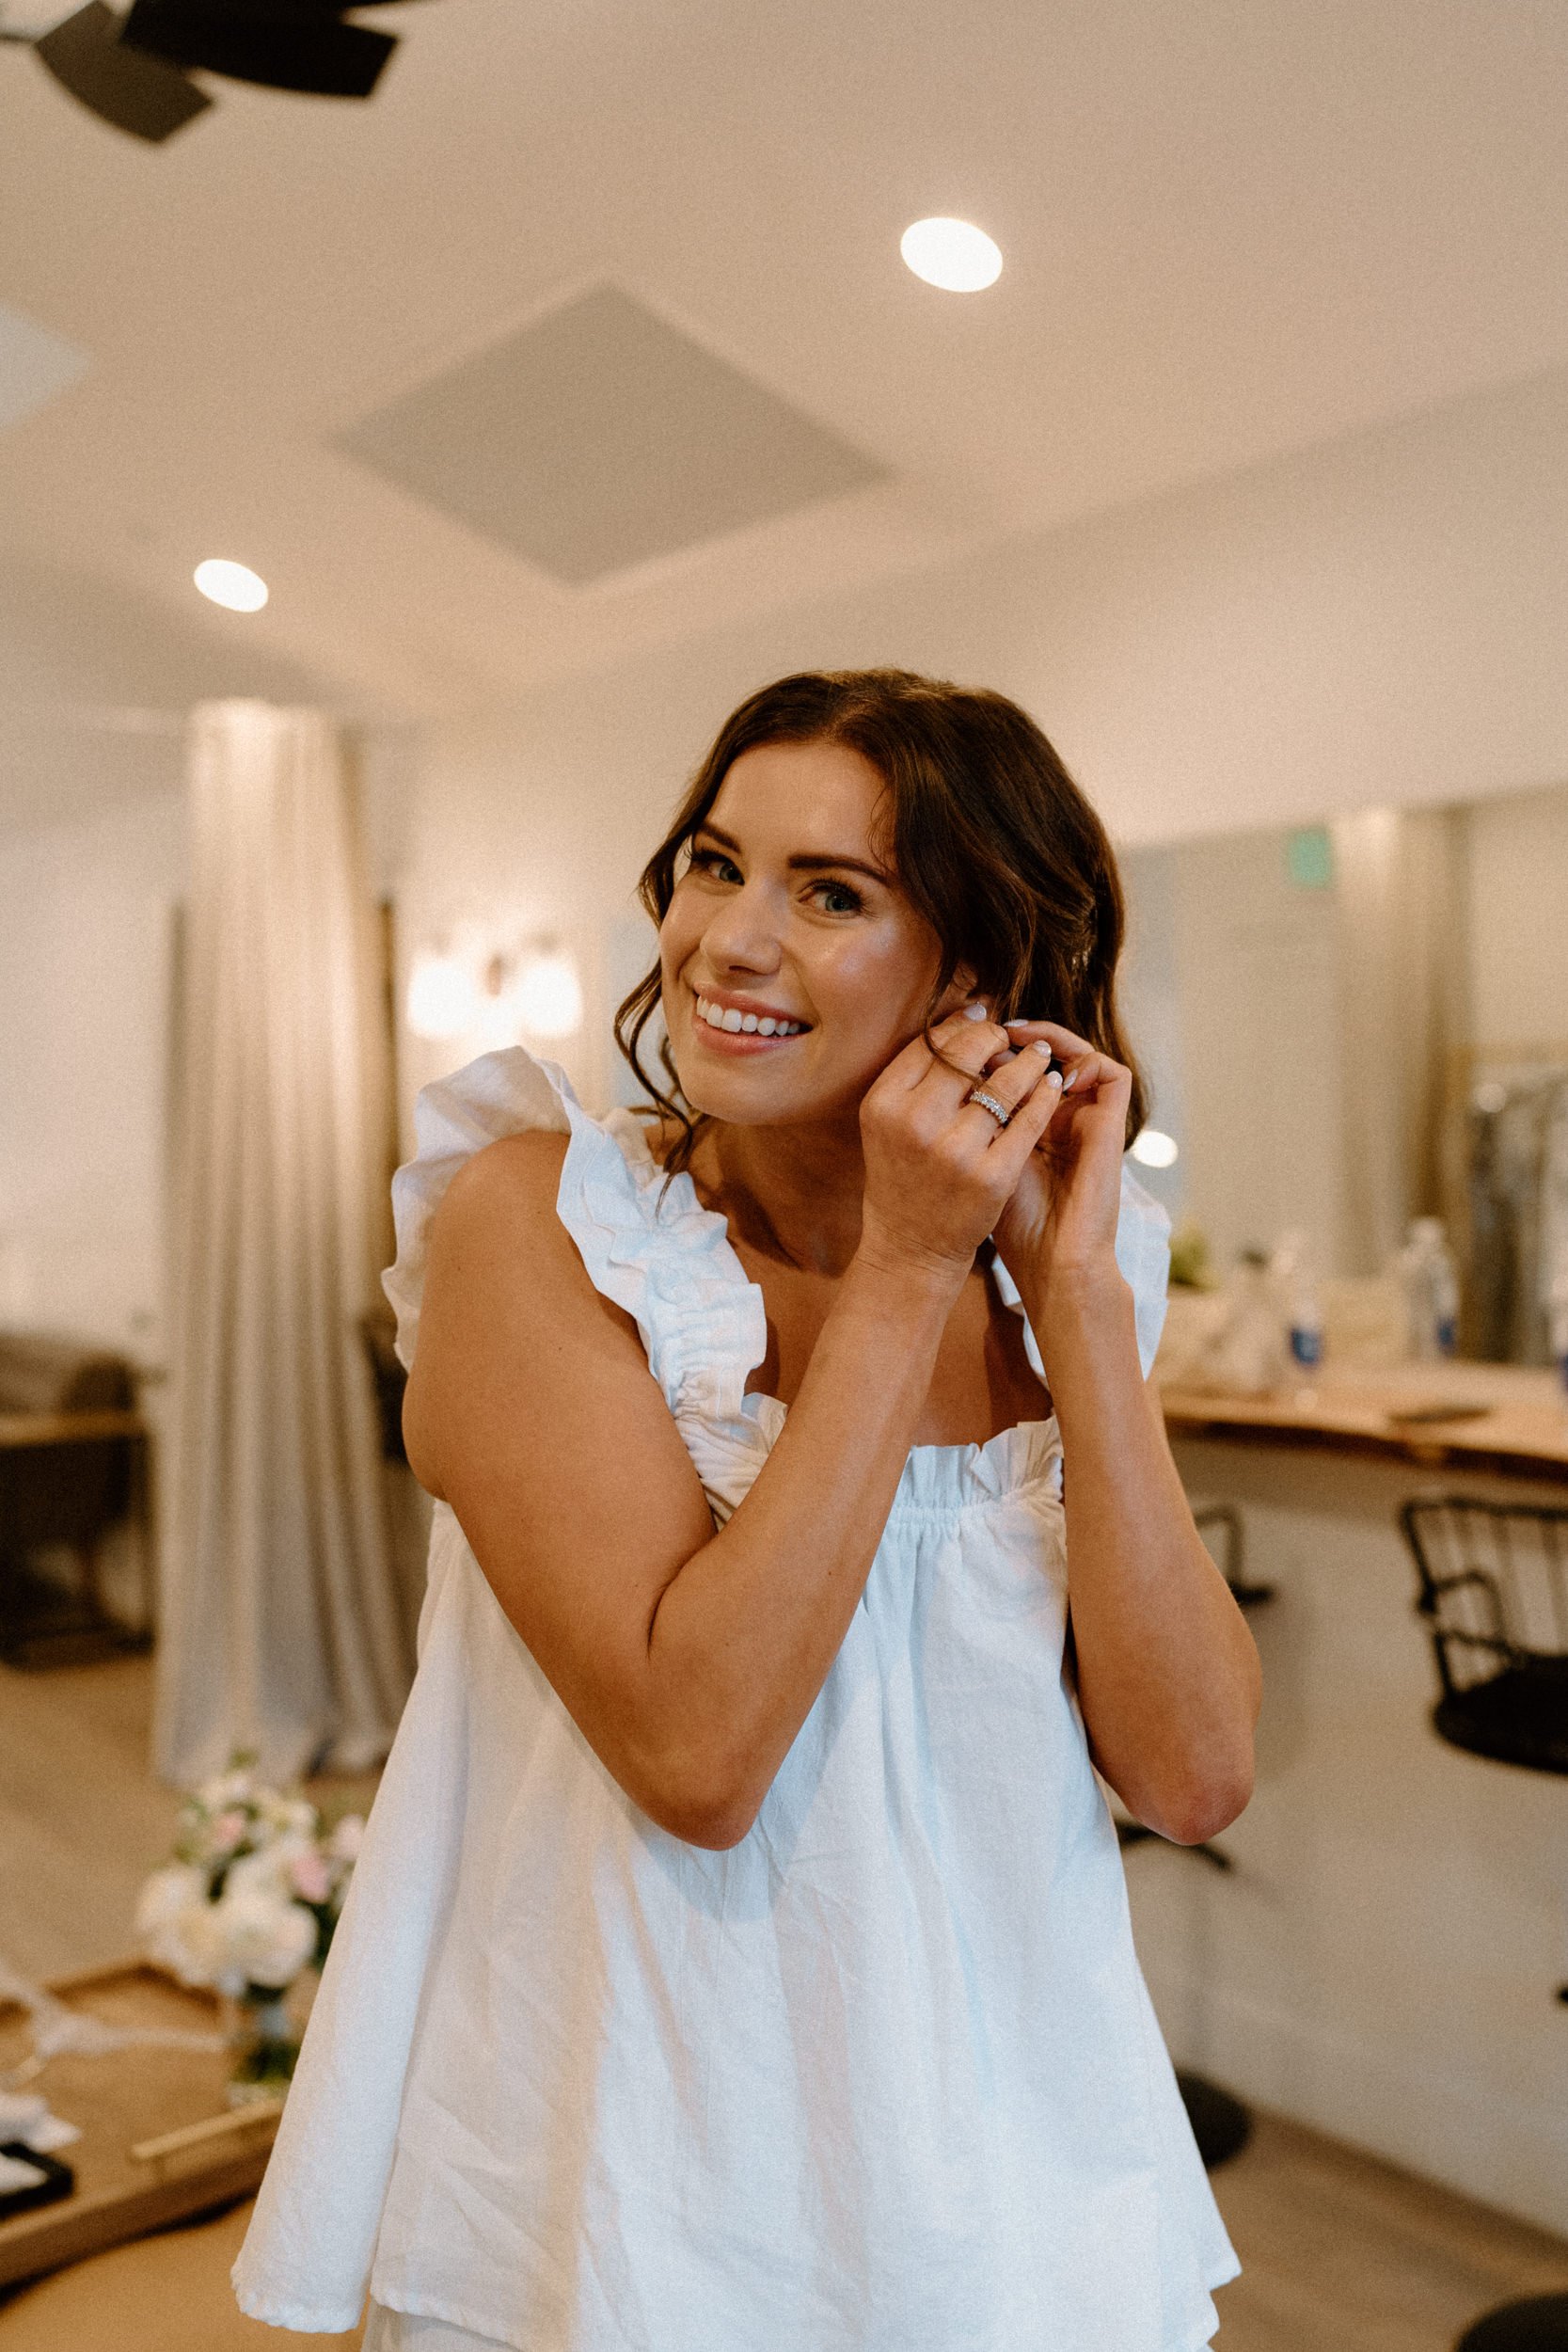 The bride smiles at the camera as she puts an earring in her ear